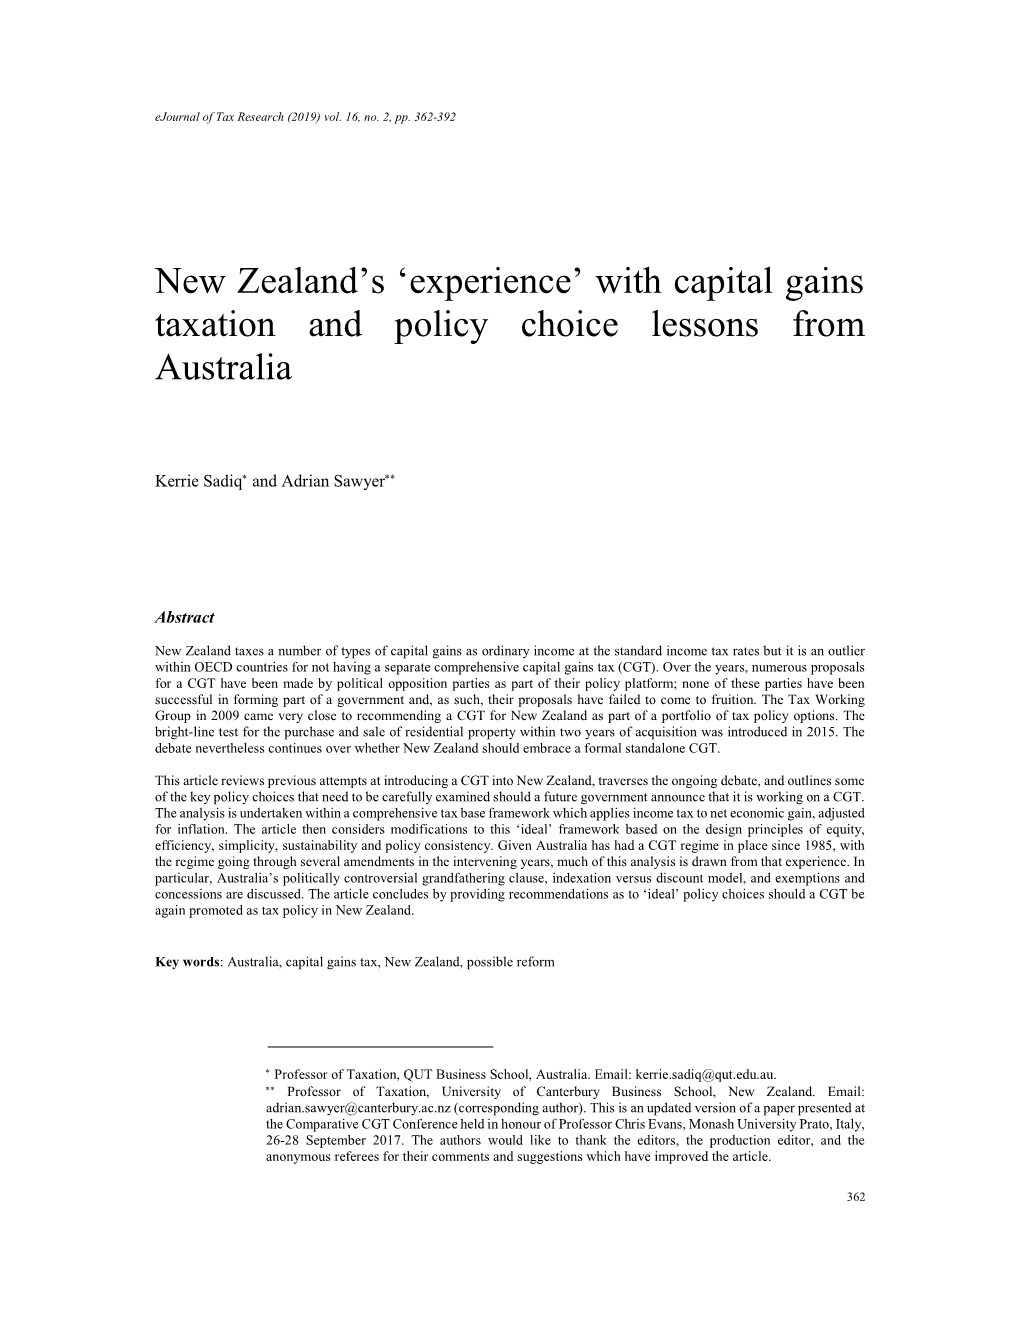 New Zealand's 'Experience' with Capital Gains Taxation and Policy